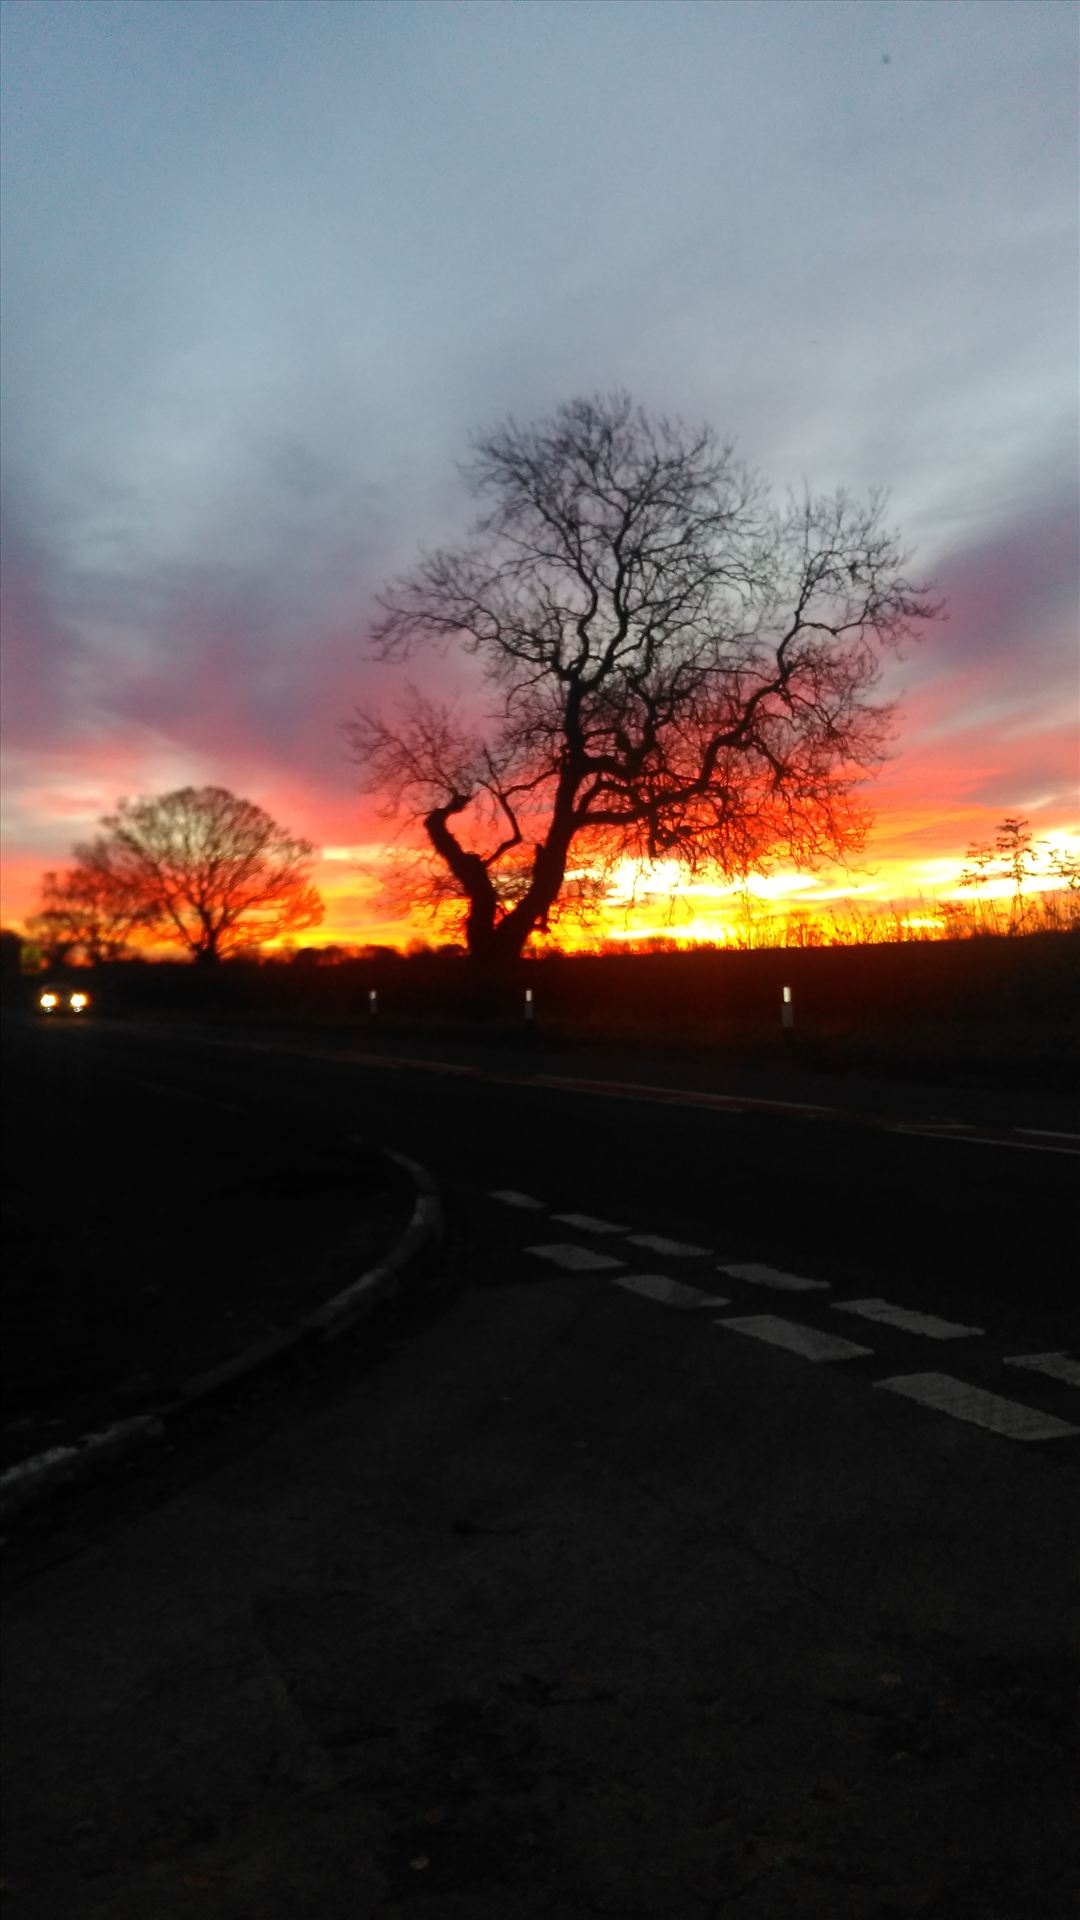 Sunrise in shincliffe - I captured this stunning sunrise in a neighbouring village one December morning by Mr